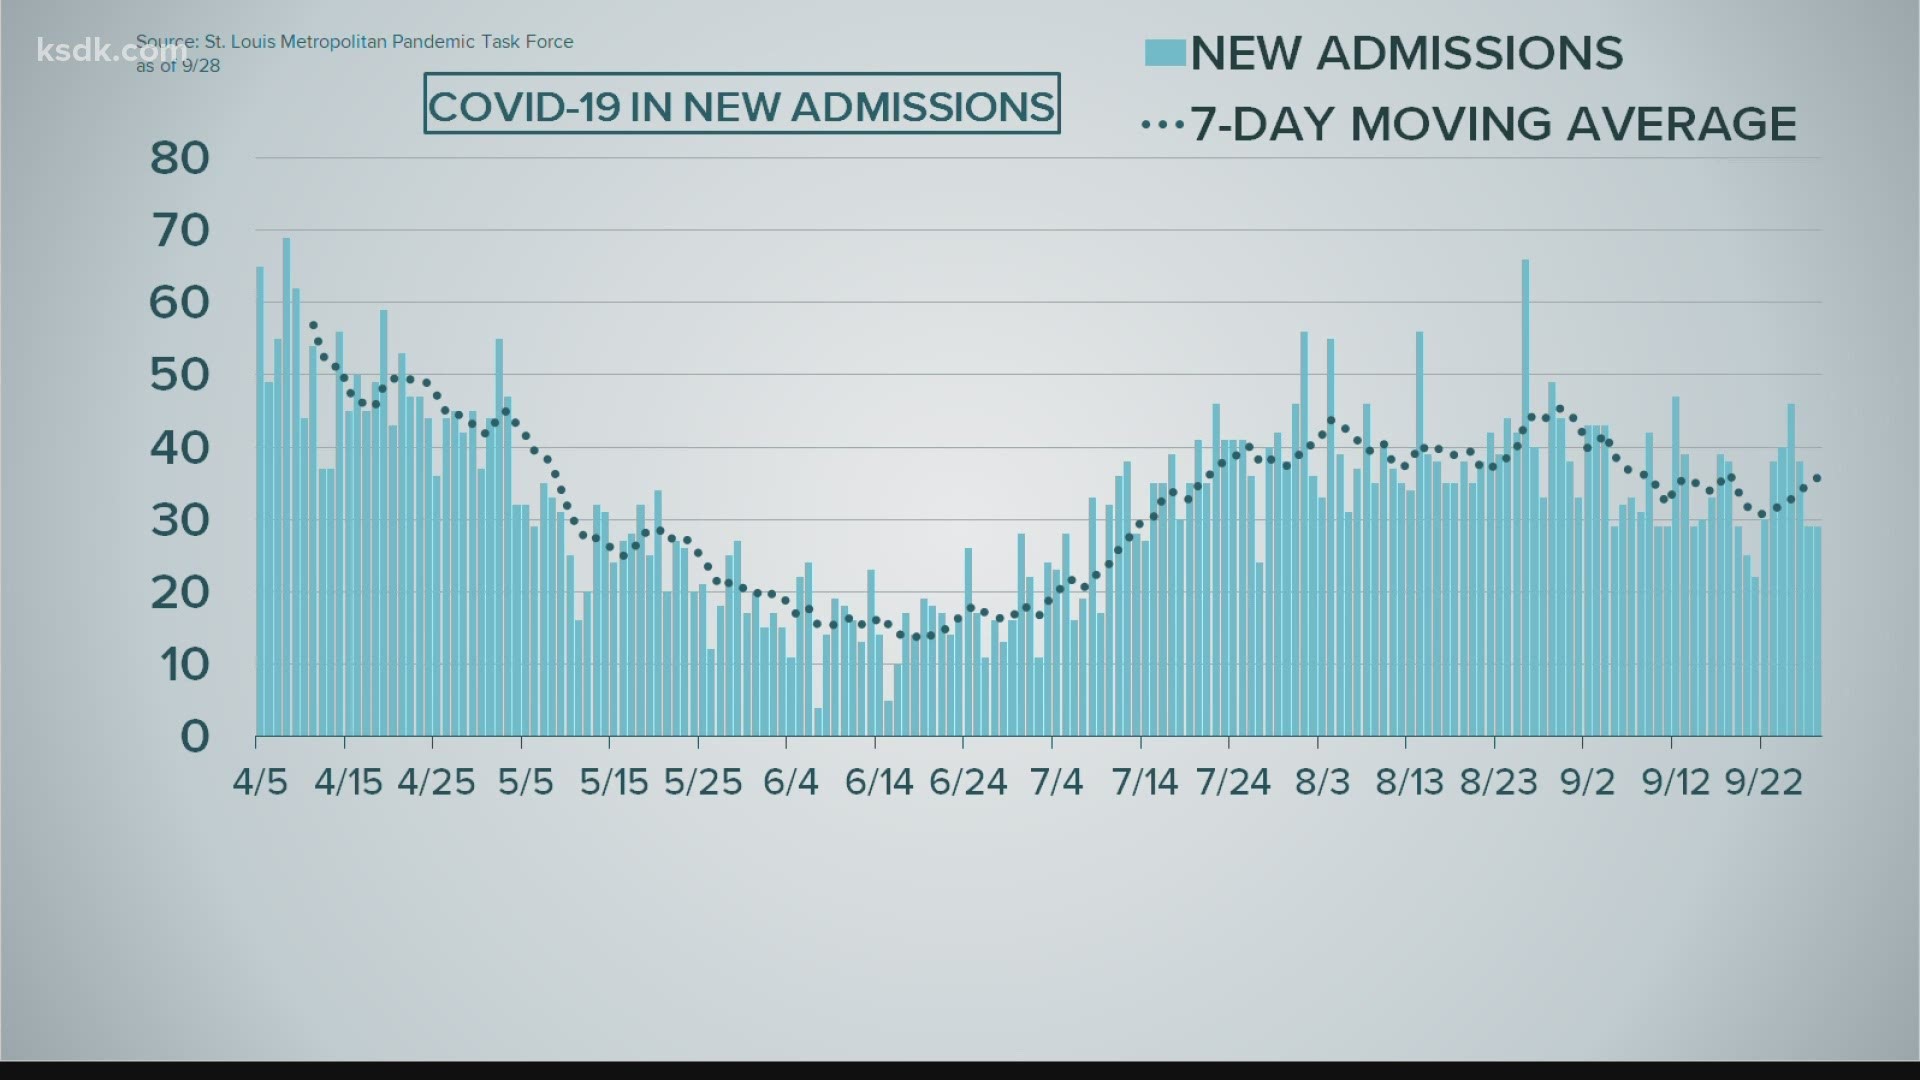 The 7-day average for New Admissions is at 36 admissions per day